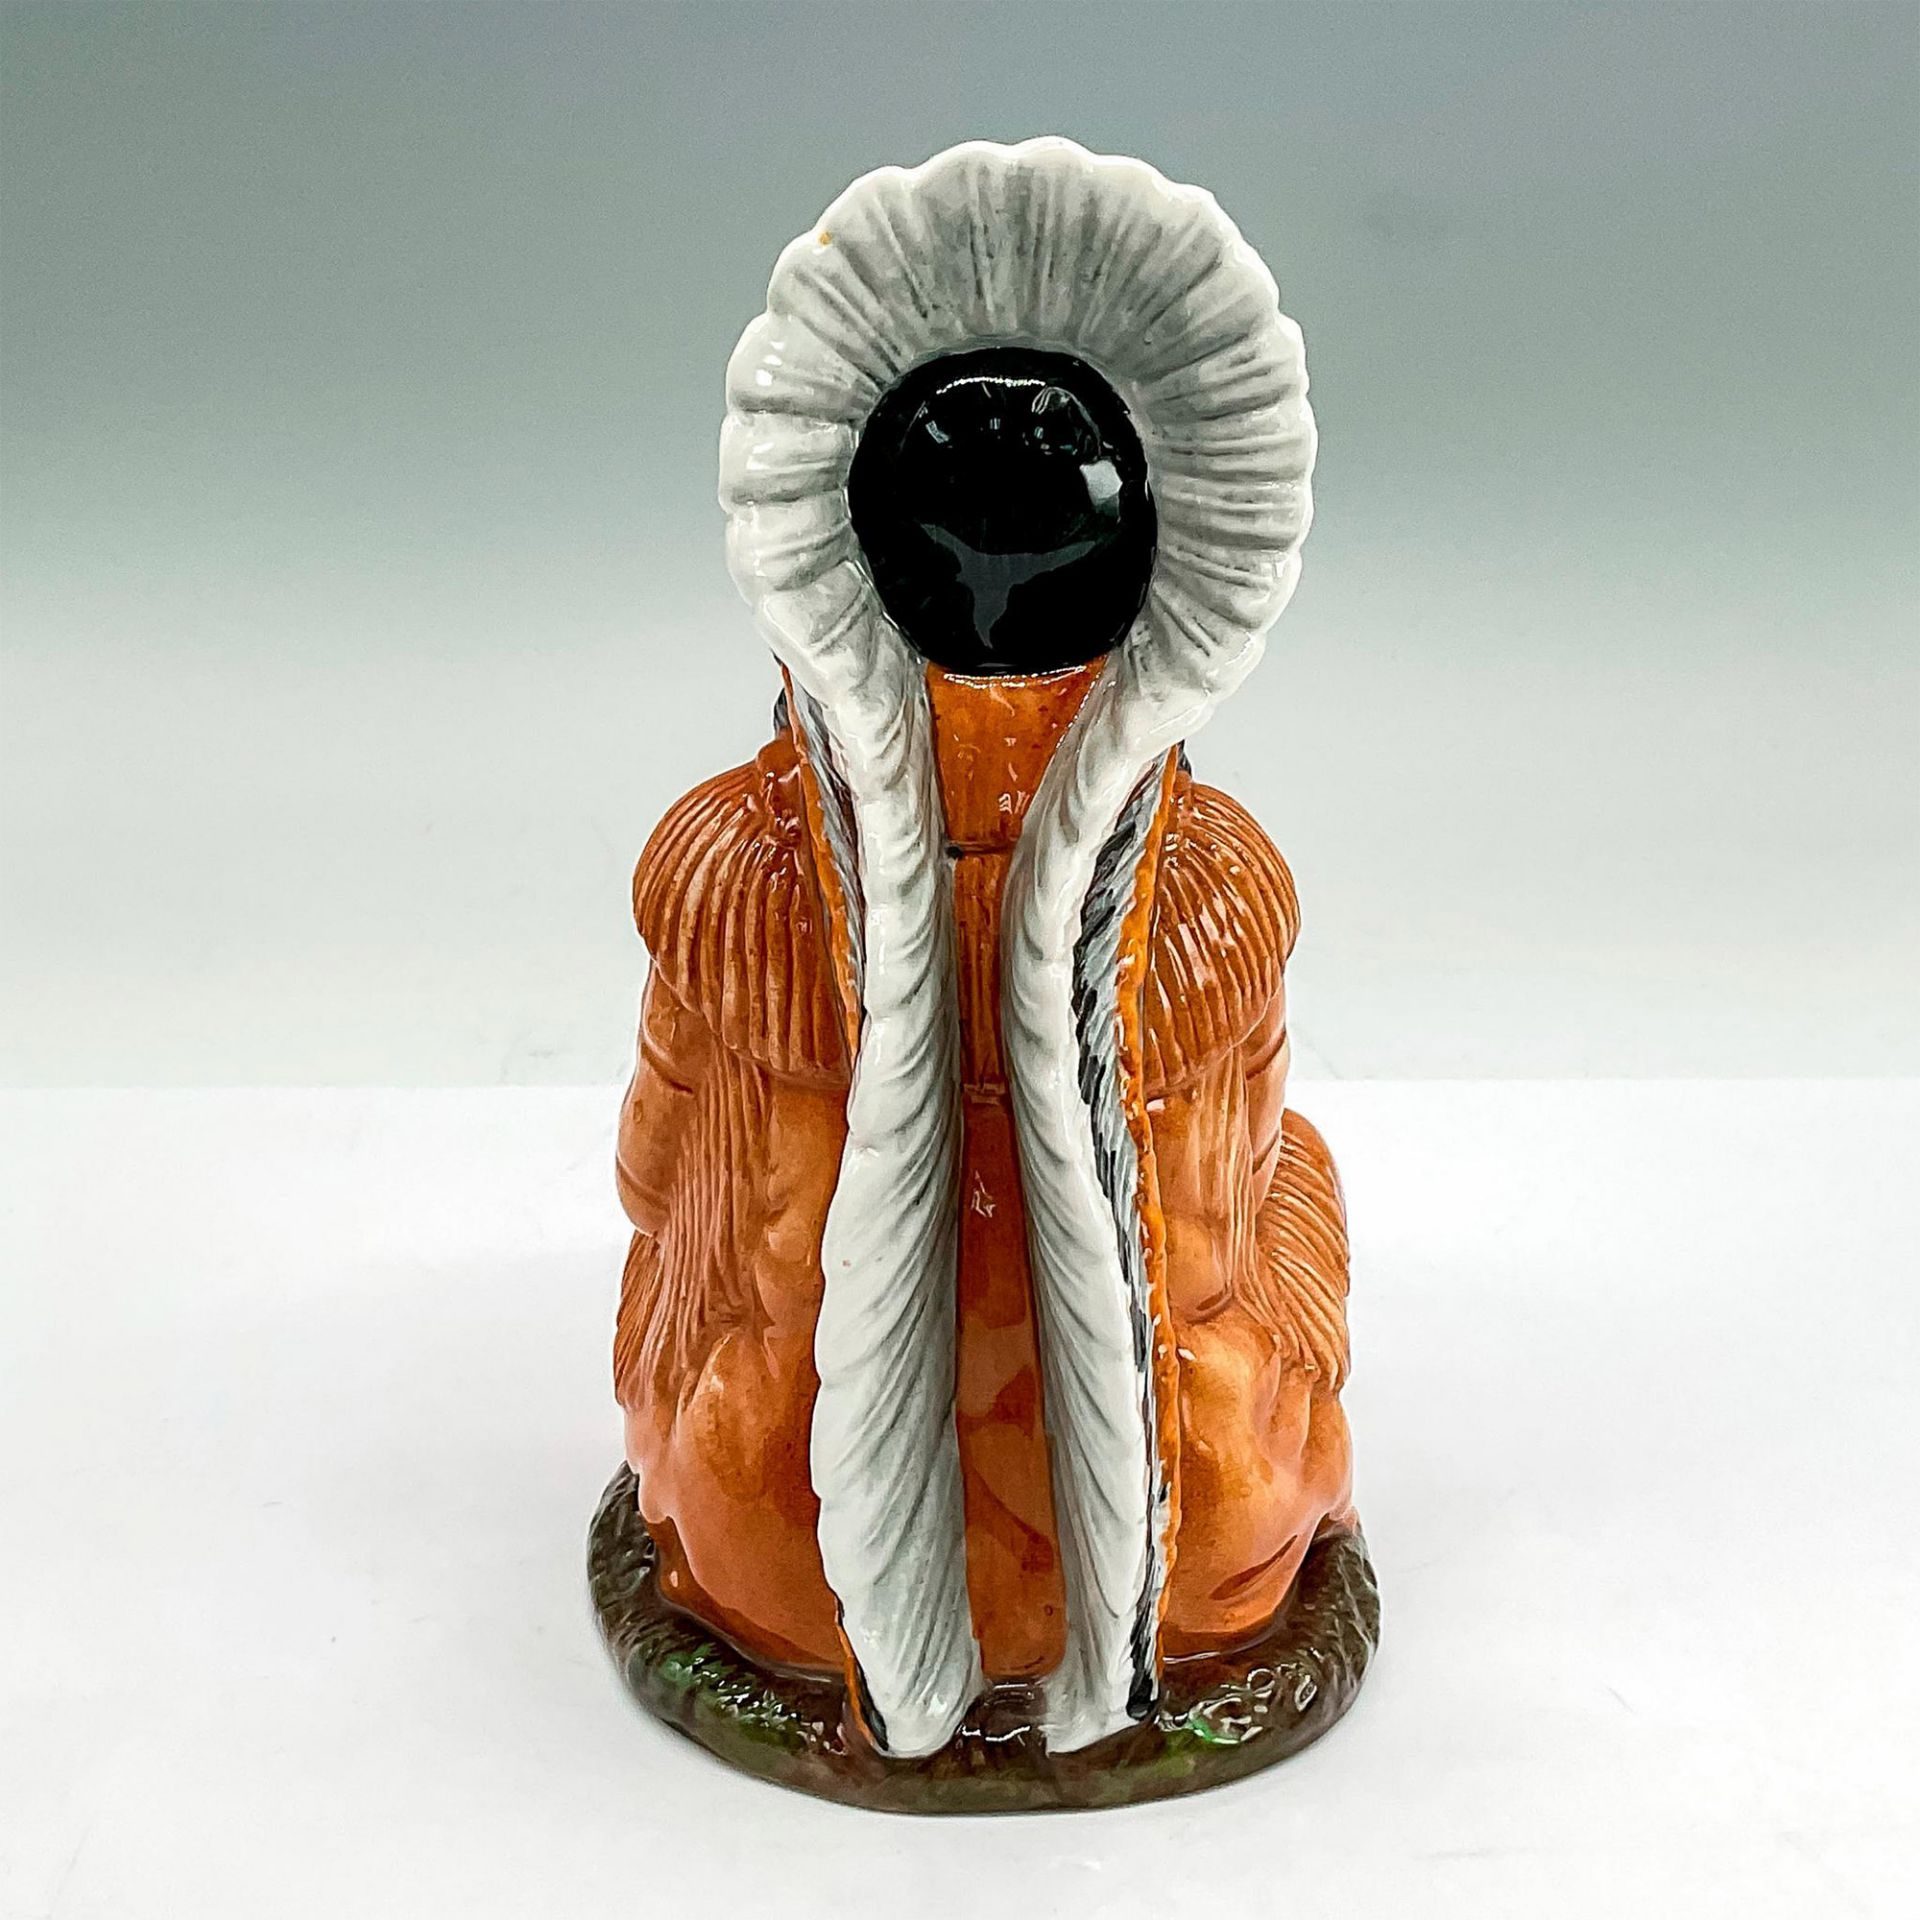 Chief - HN2892 - Royal Doulton Figurine - Image 3 of 4